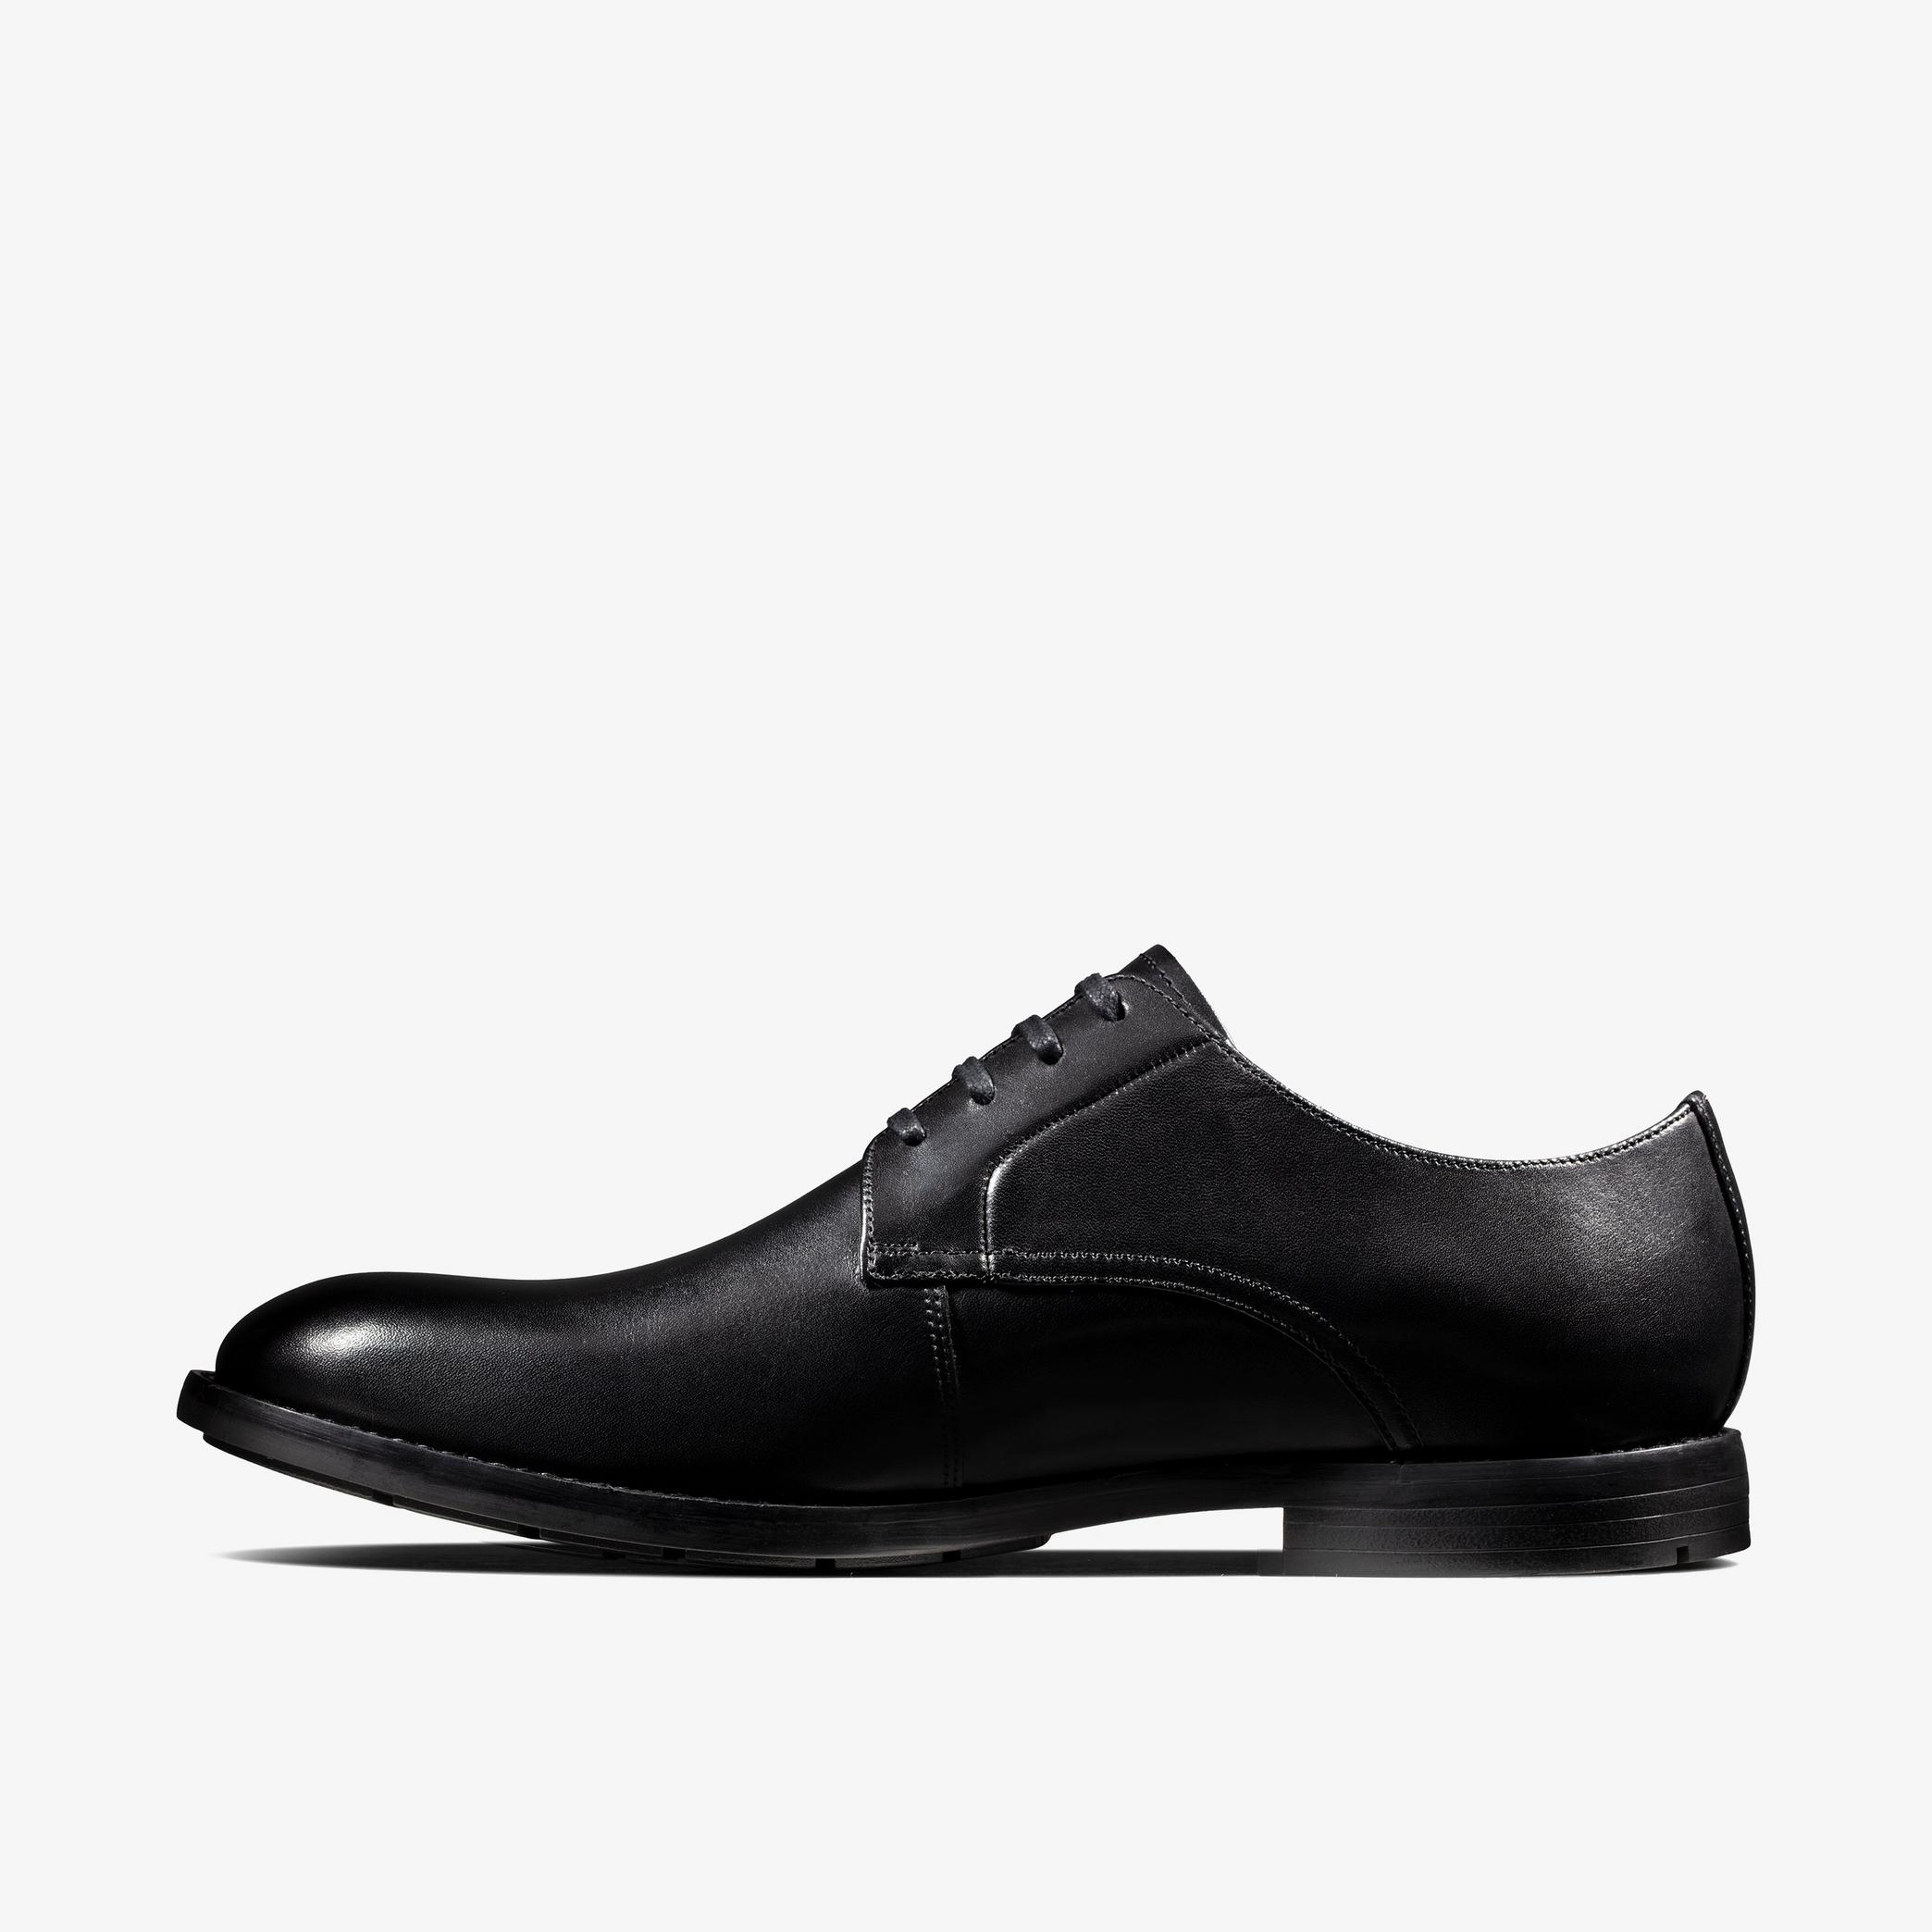 Ronnie Walk Black Leather Derby Shoes, view 2 of 6